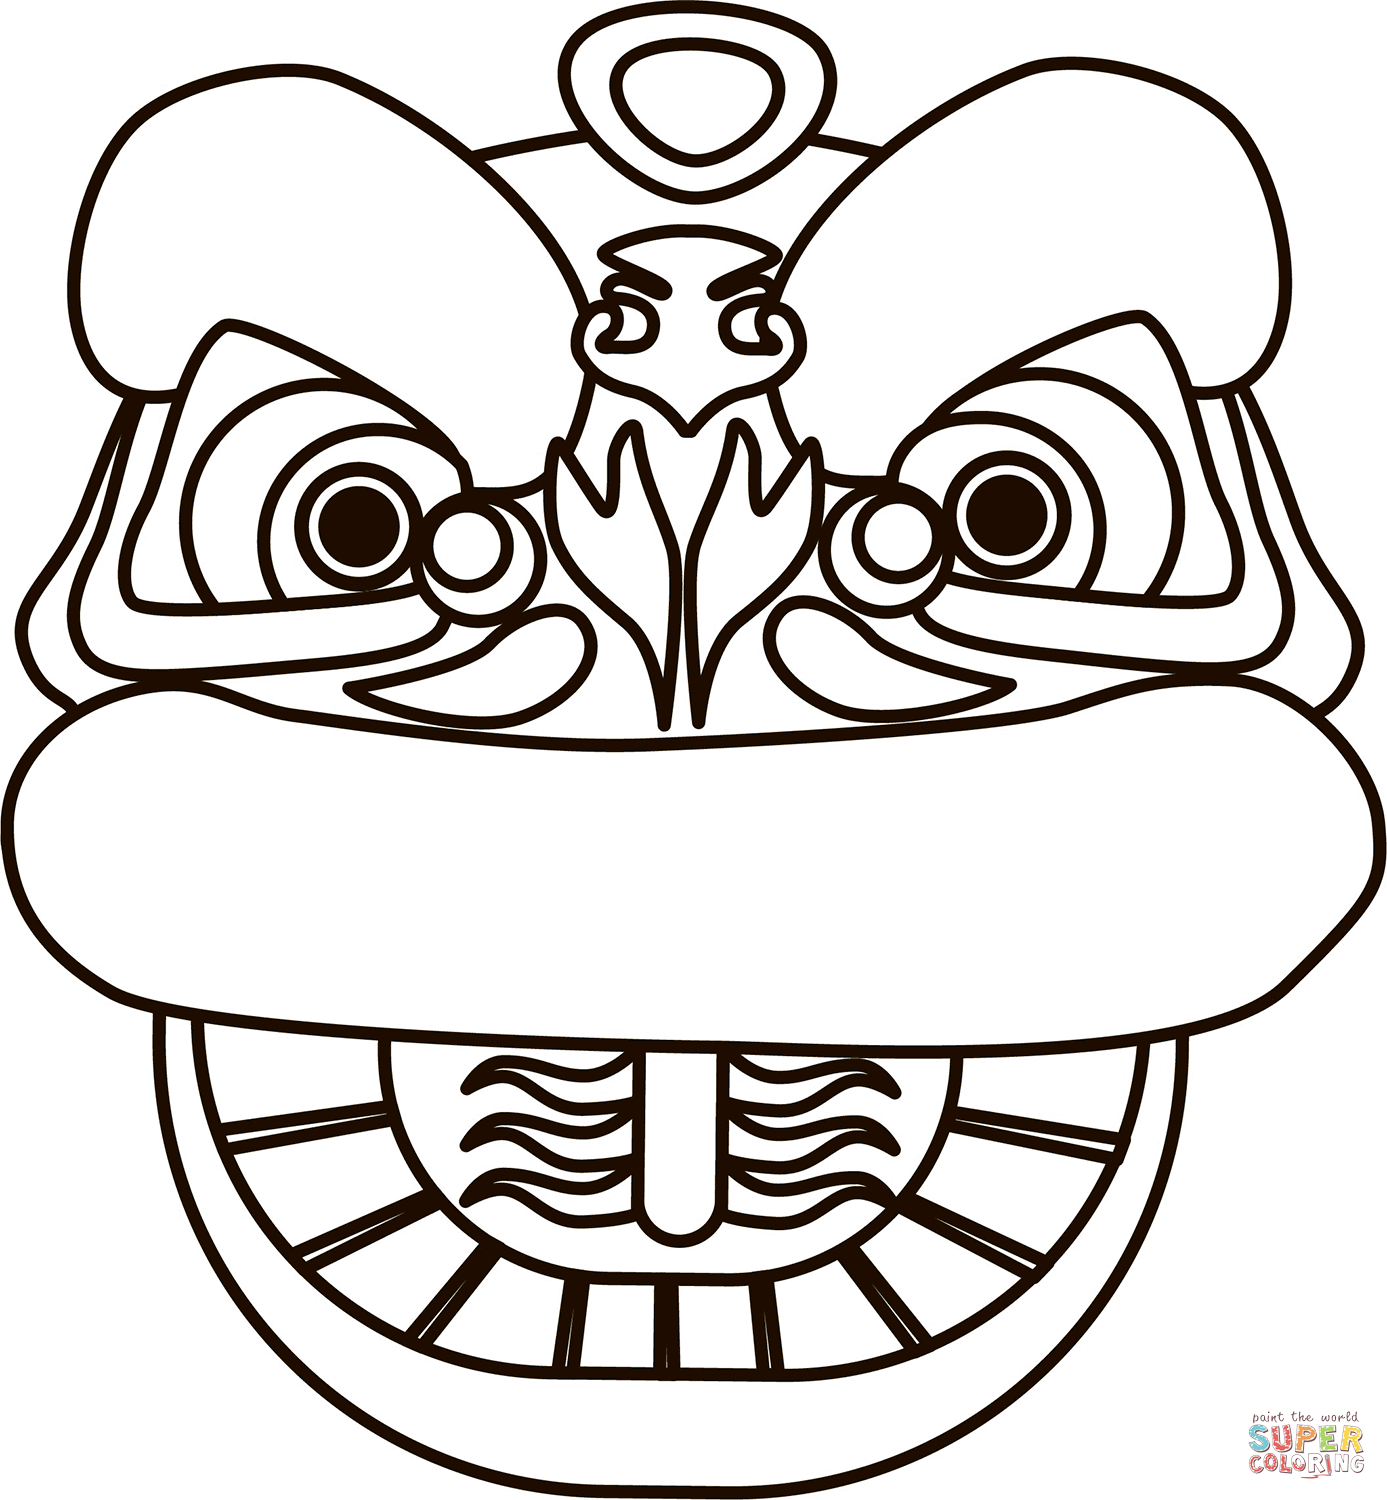 Chinese dragon coloring page free printable coloring pages